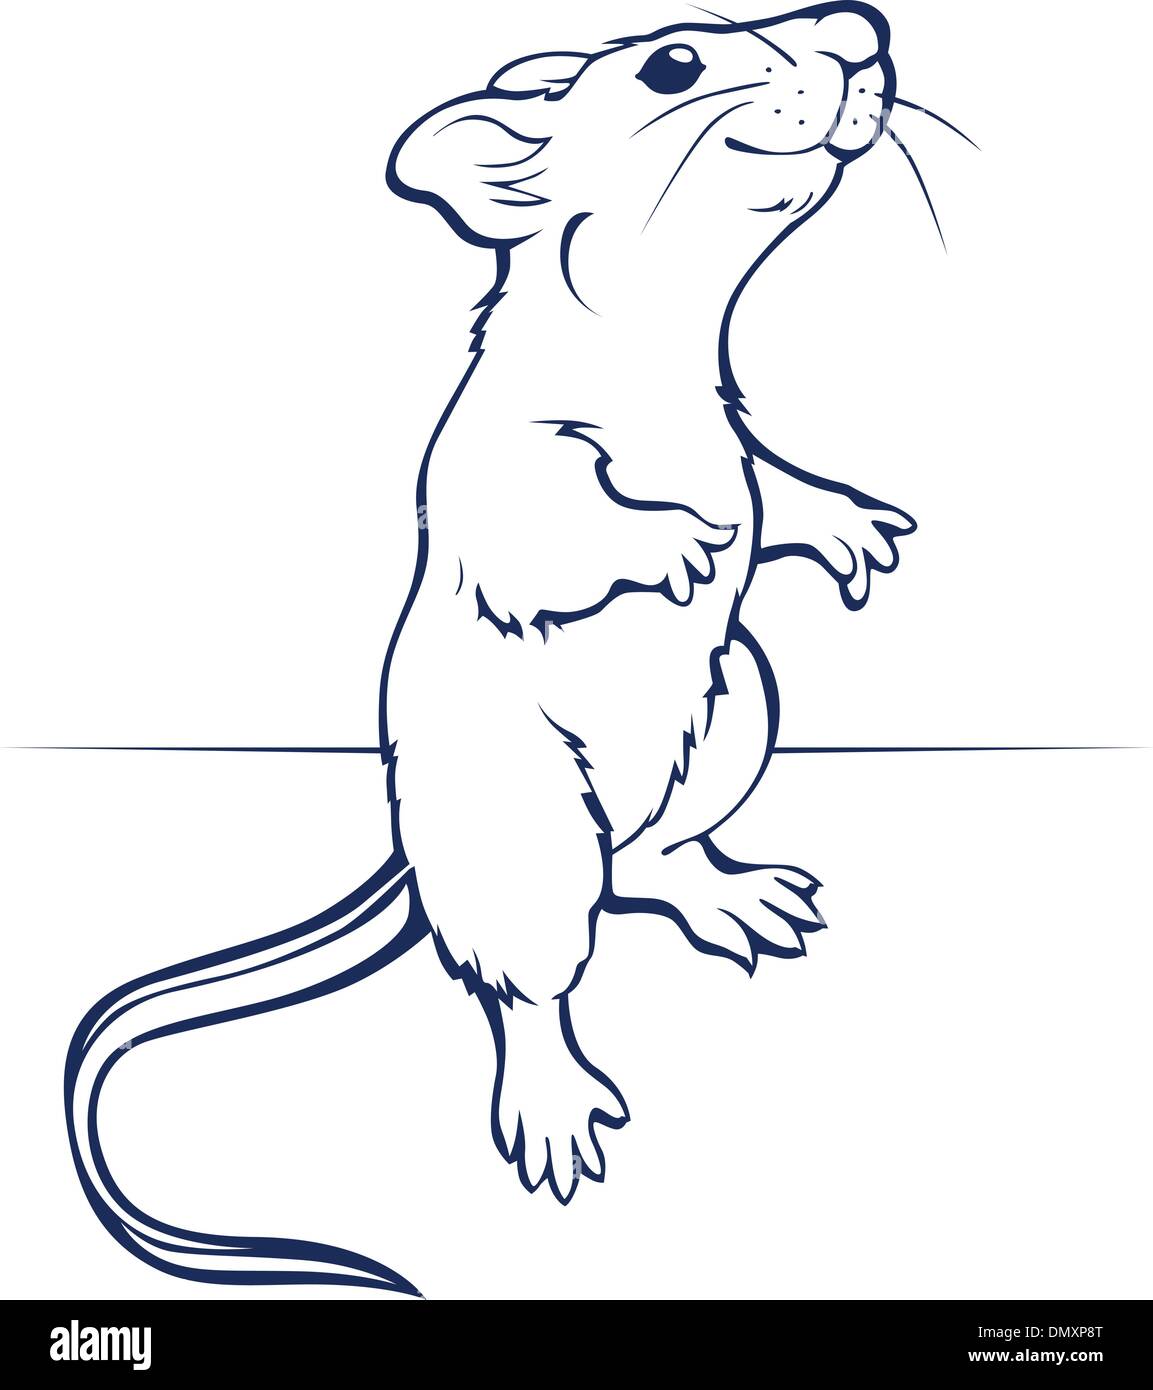 Rat Drawing Easy To Draw For Beginners / Fully Explained - Babasart..